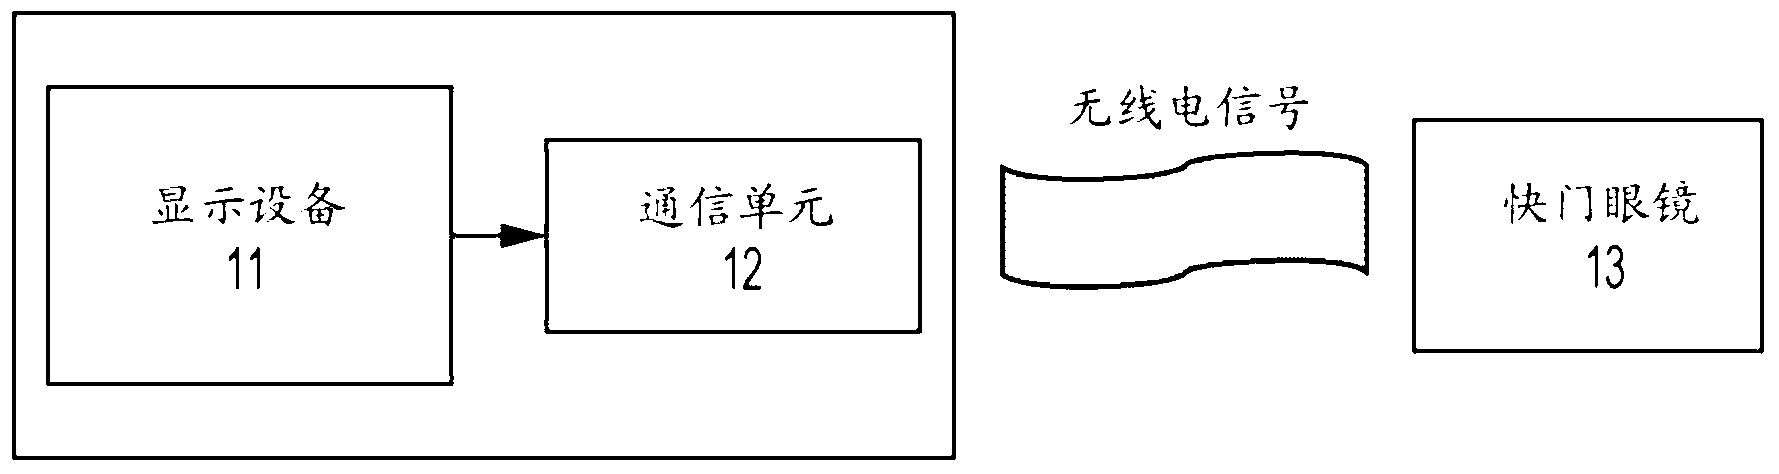 Image display system, display device, and shutter glasses